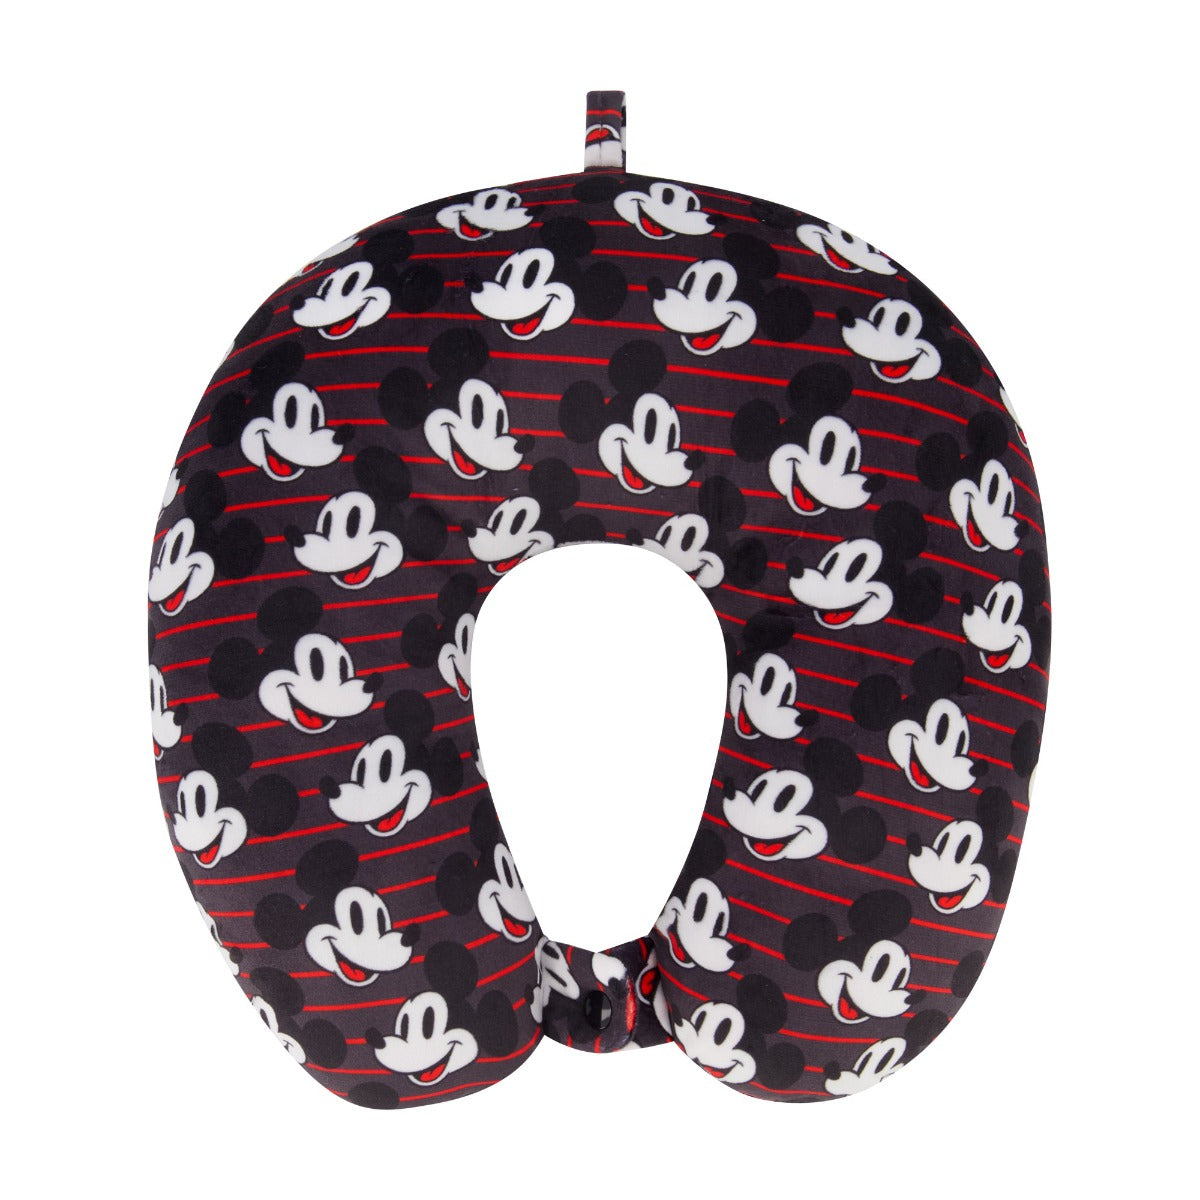 Disney mickey mouse neck pillow red black white - best travel pillow for support